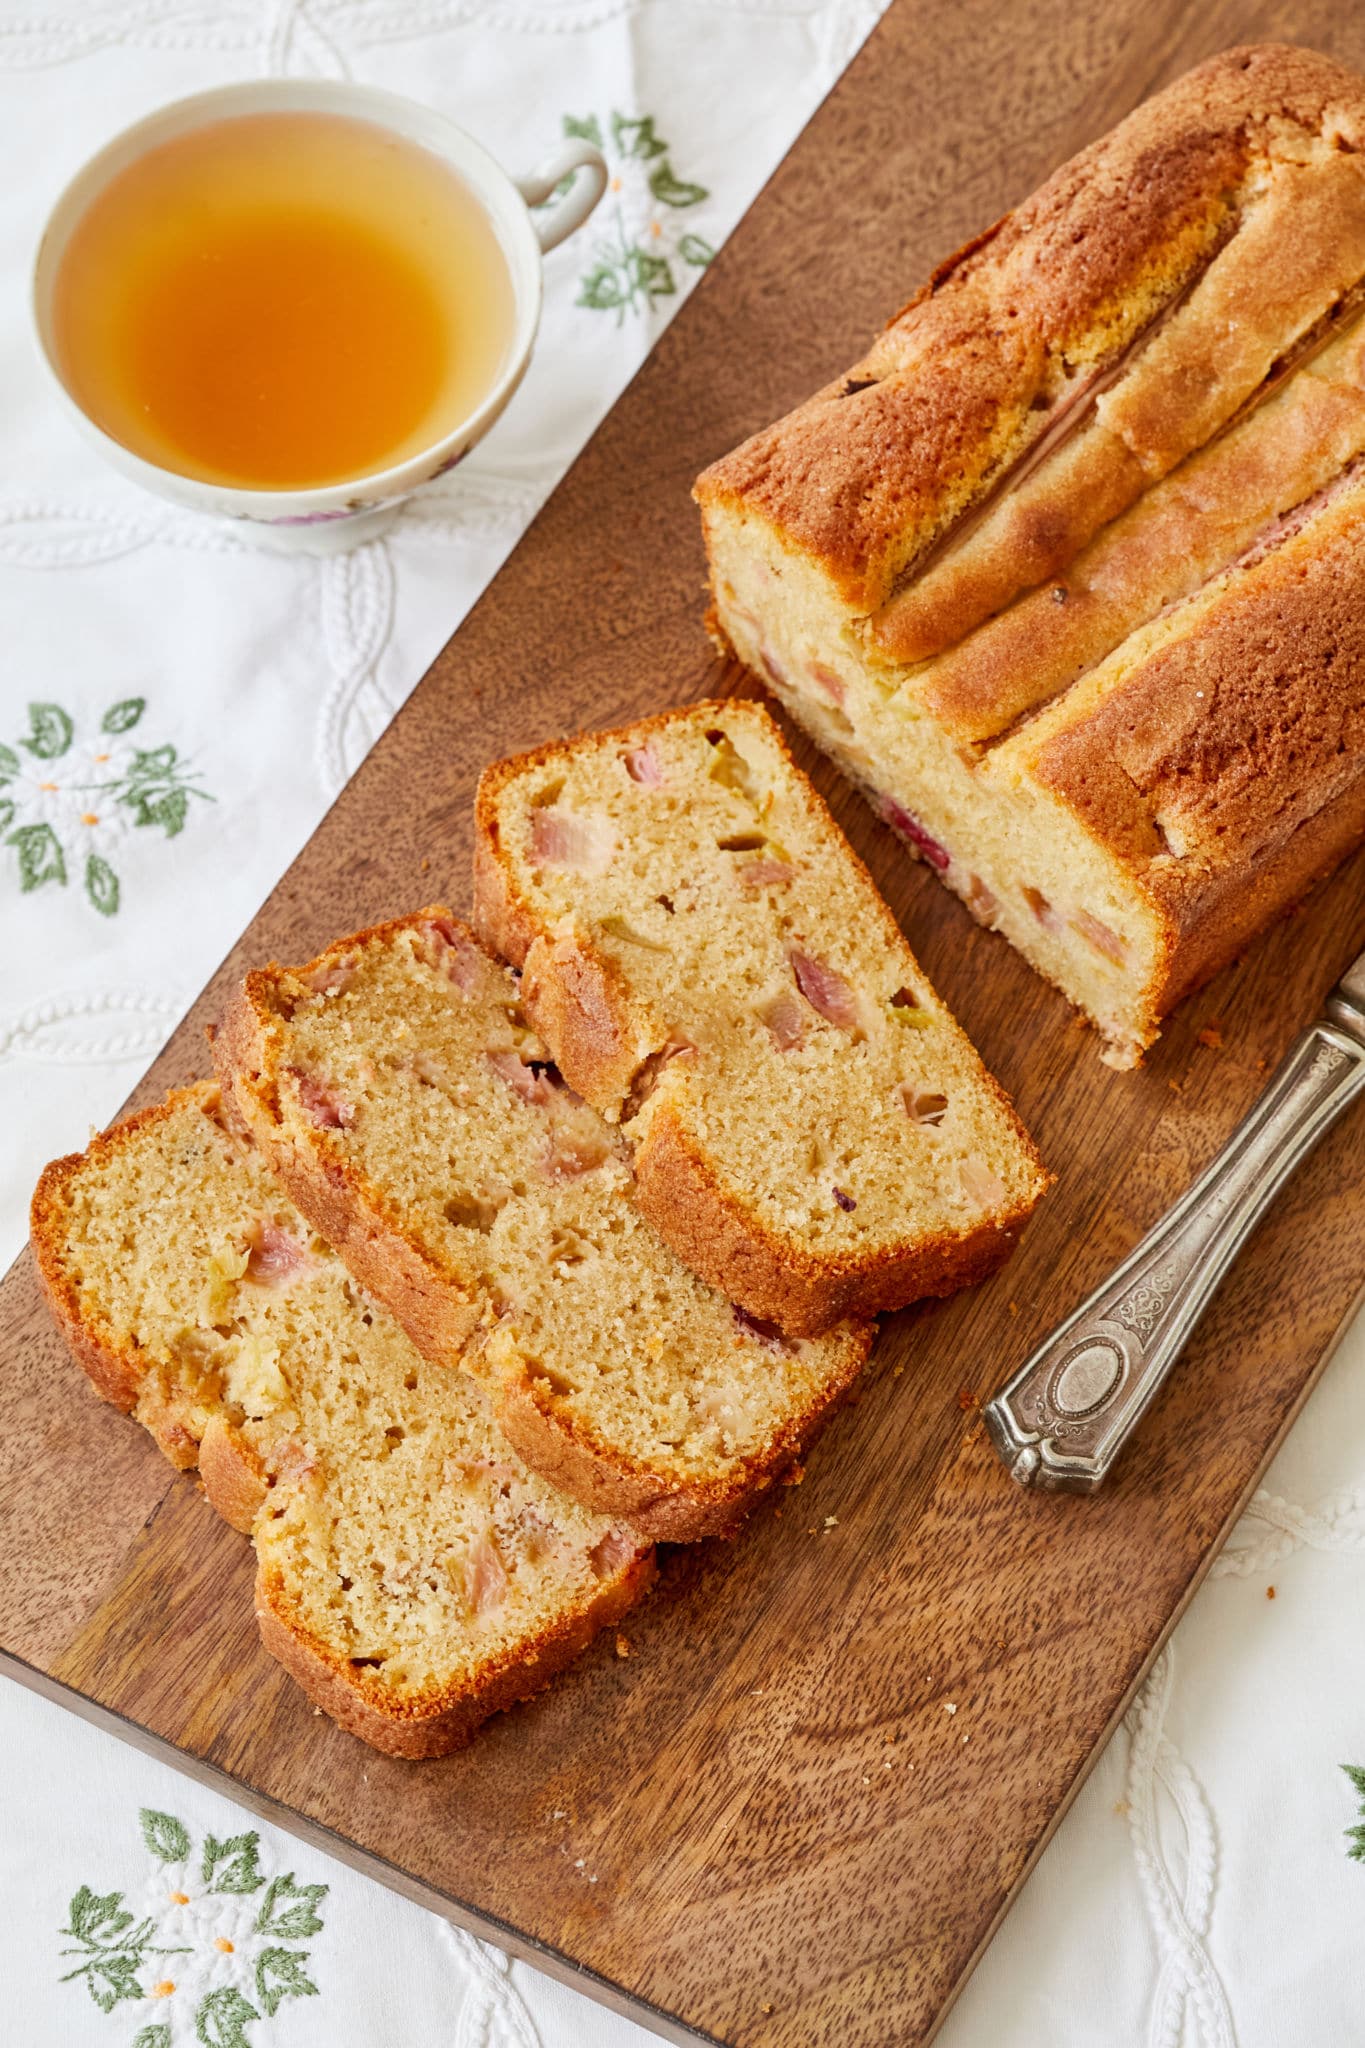 A loaf of rhubarb ginger quick bread is cut into three slices and displayed on a wooden cutting board on top of a white tablecloth and next to a cup of tea.